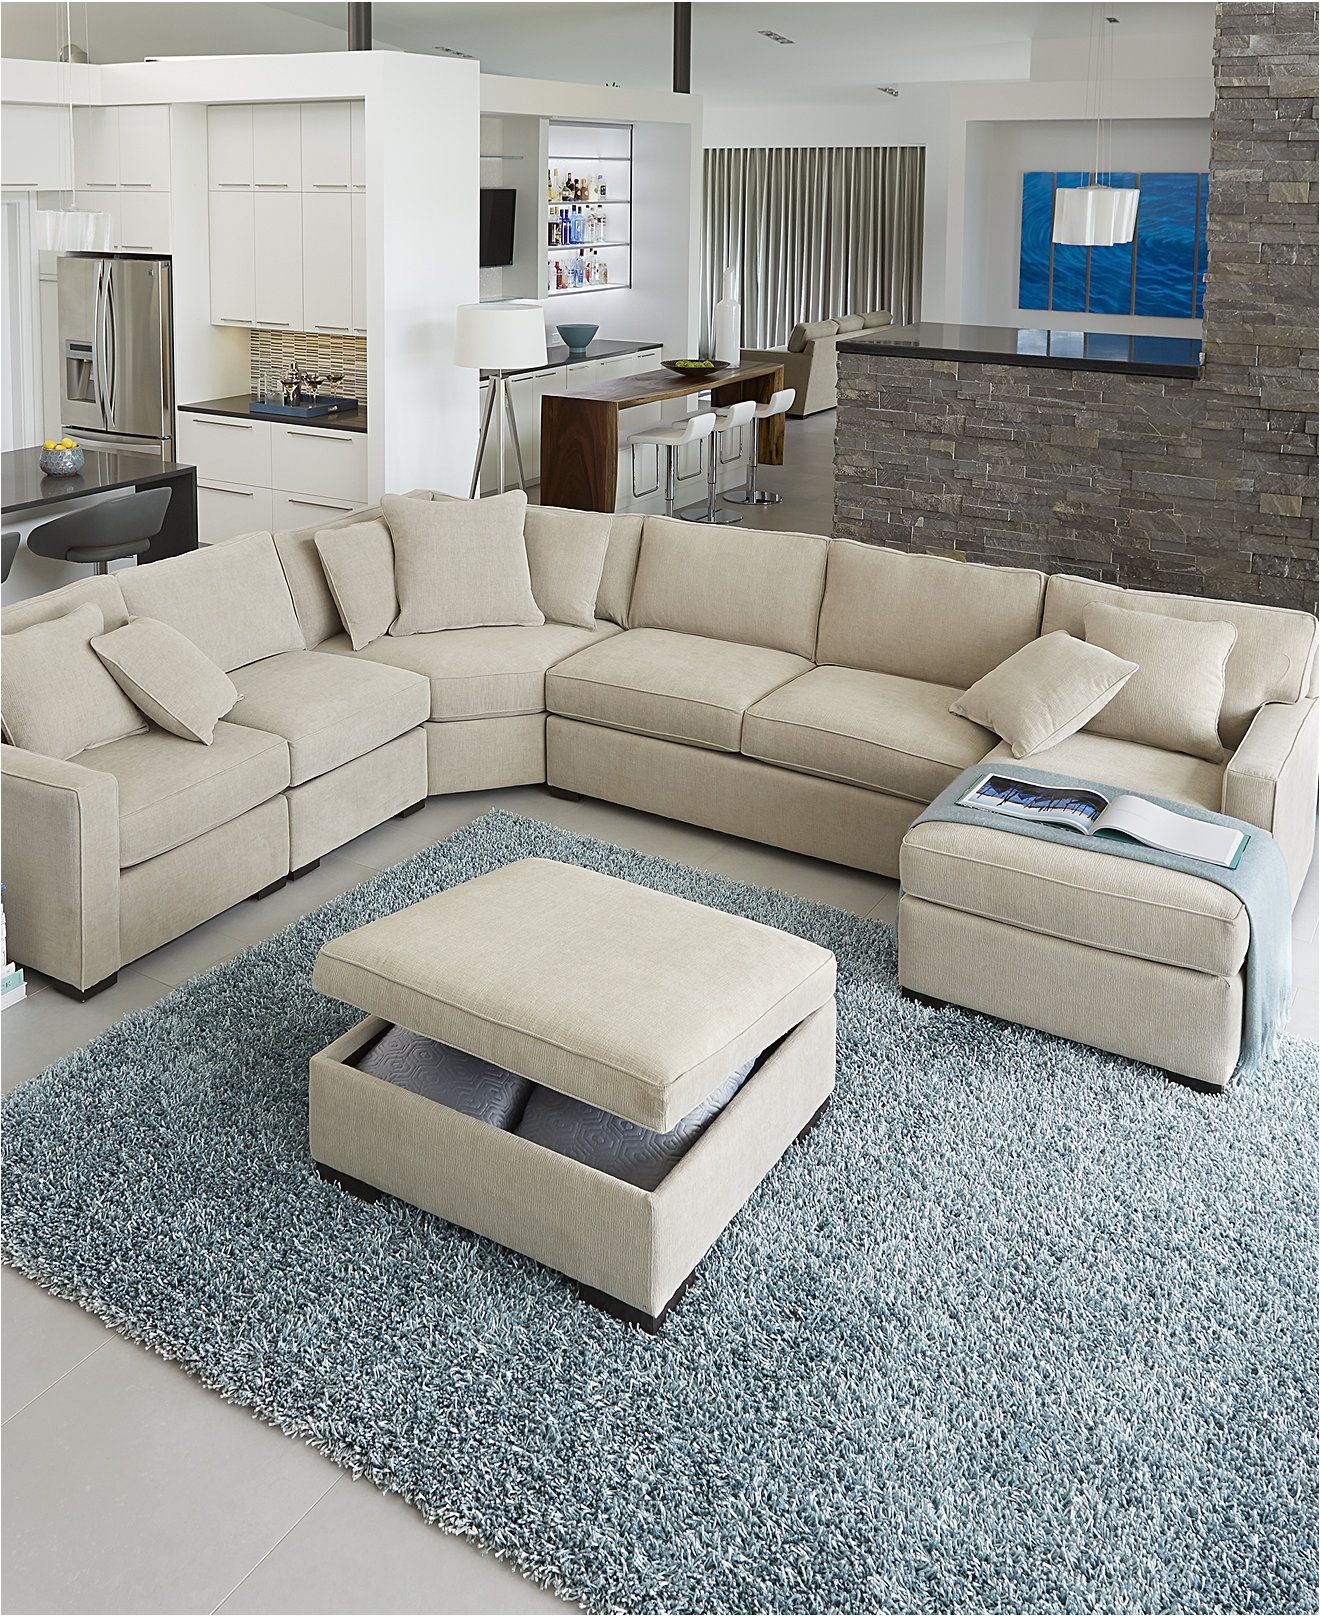 radley fabric sectional sofa living room furniture collection furniture macy s would need chair piece wedge and apartment sofa